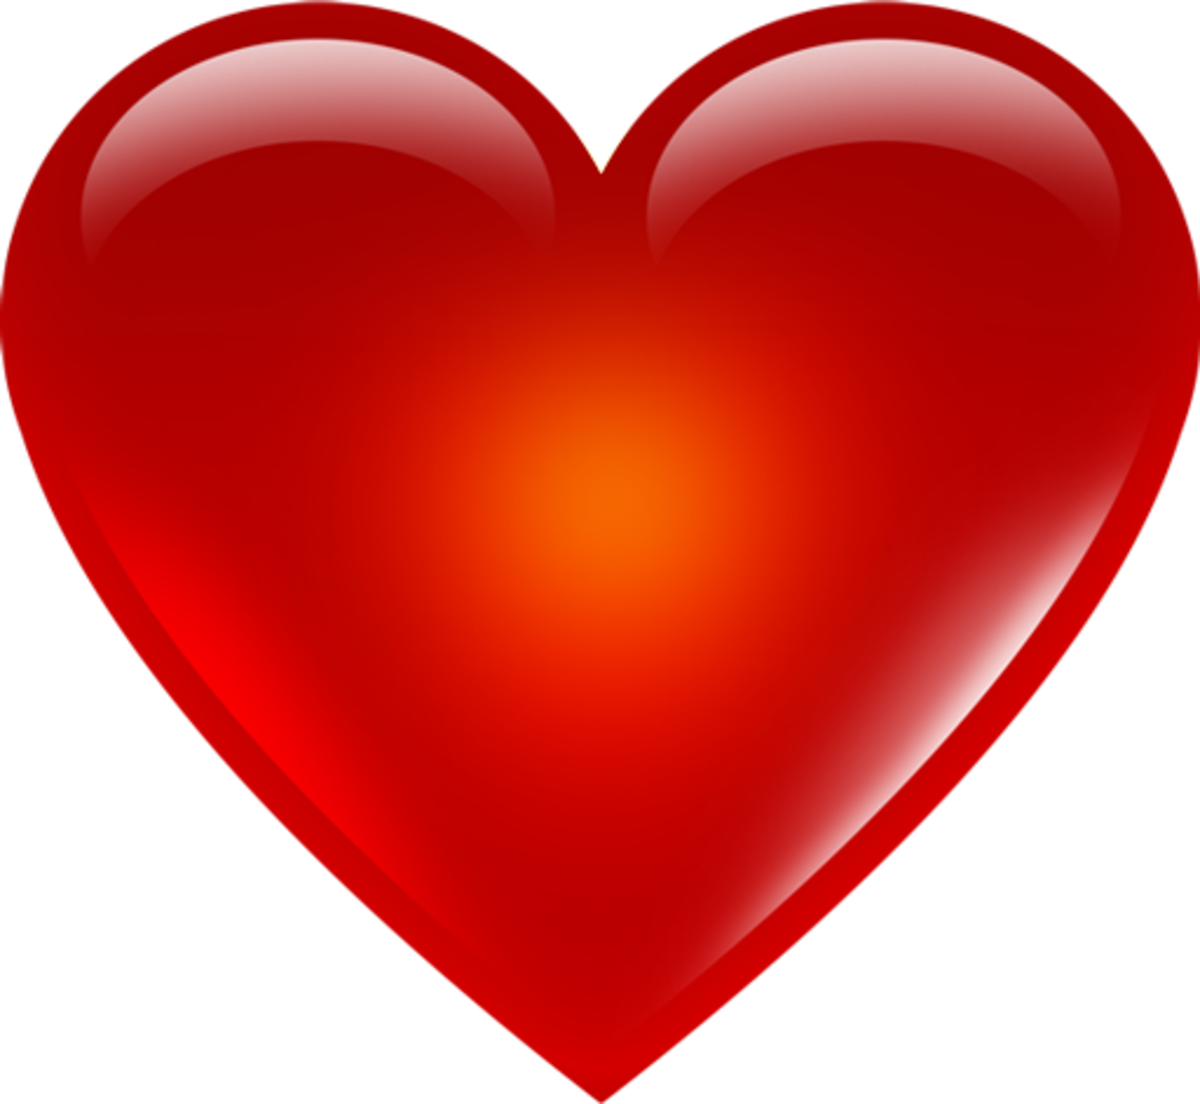 100-pictures-of-hearts-heart-images-symbol-of-love-hubpages